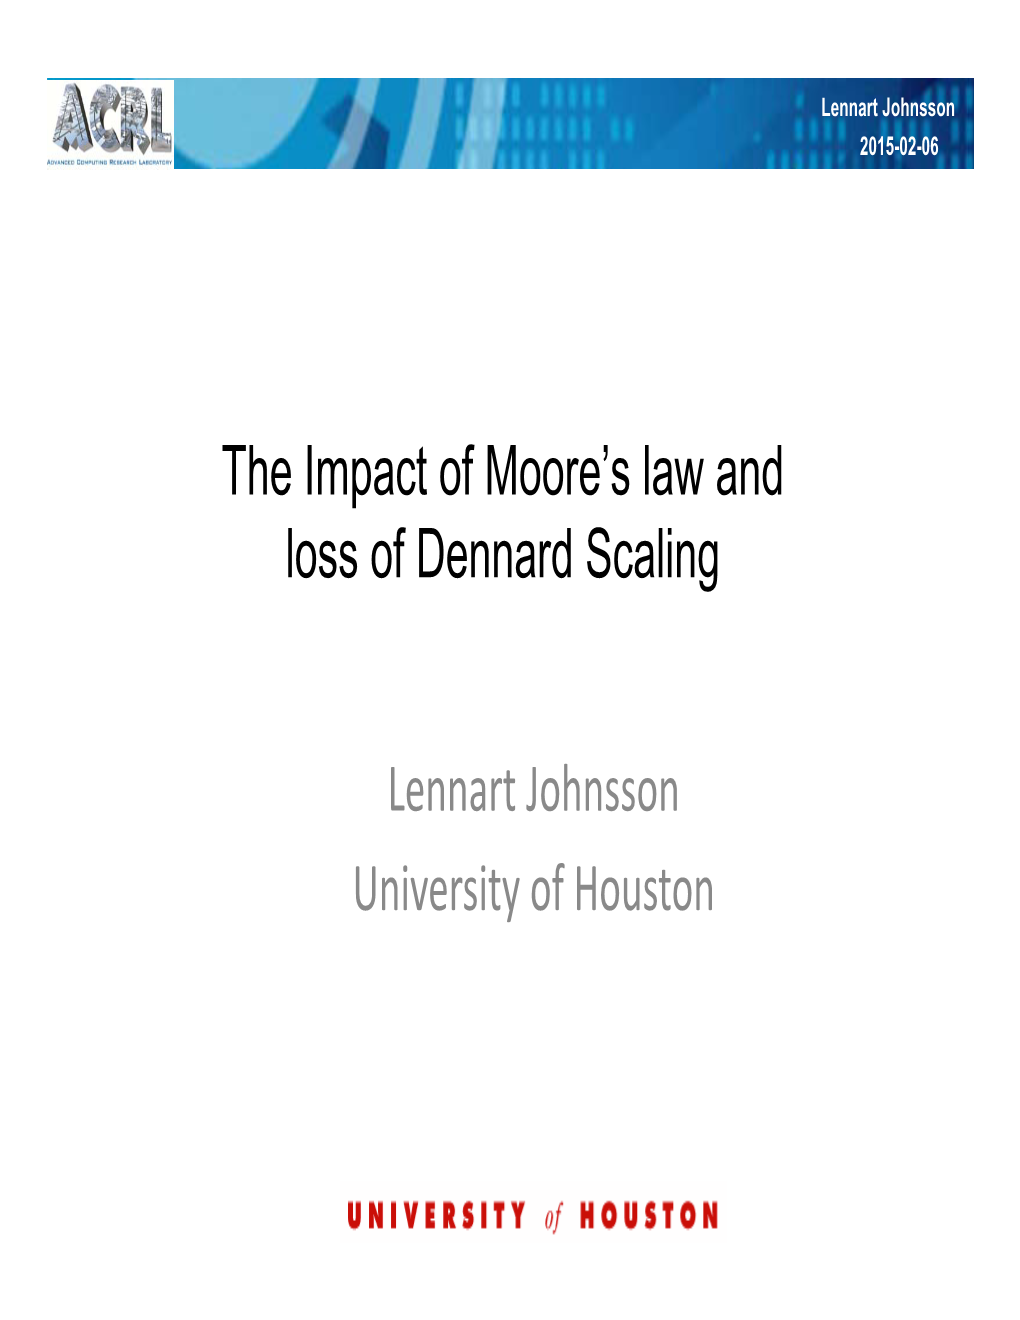 The Impact of Moore's Law and Loss of Dennard